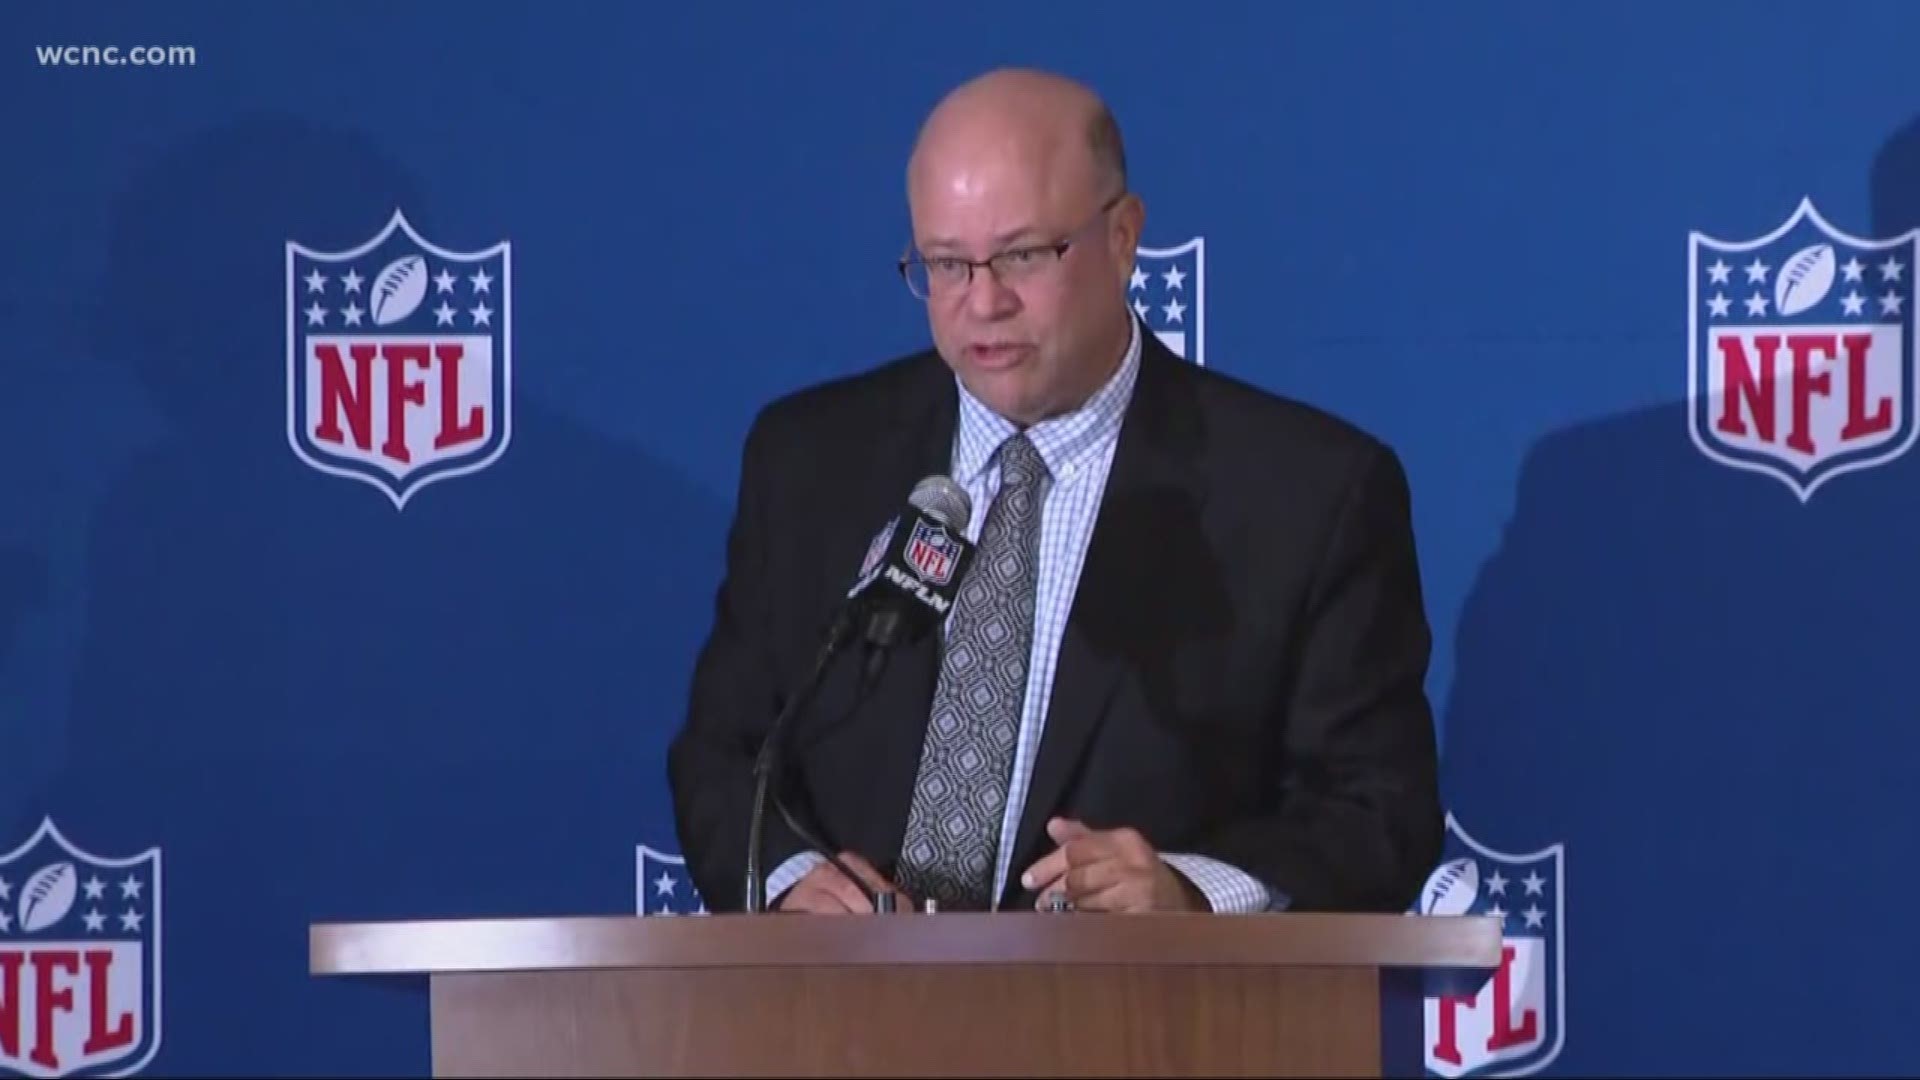 New Carolina Panthers owner David Tepper answered questions today from the media about the future of the Panthers.